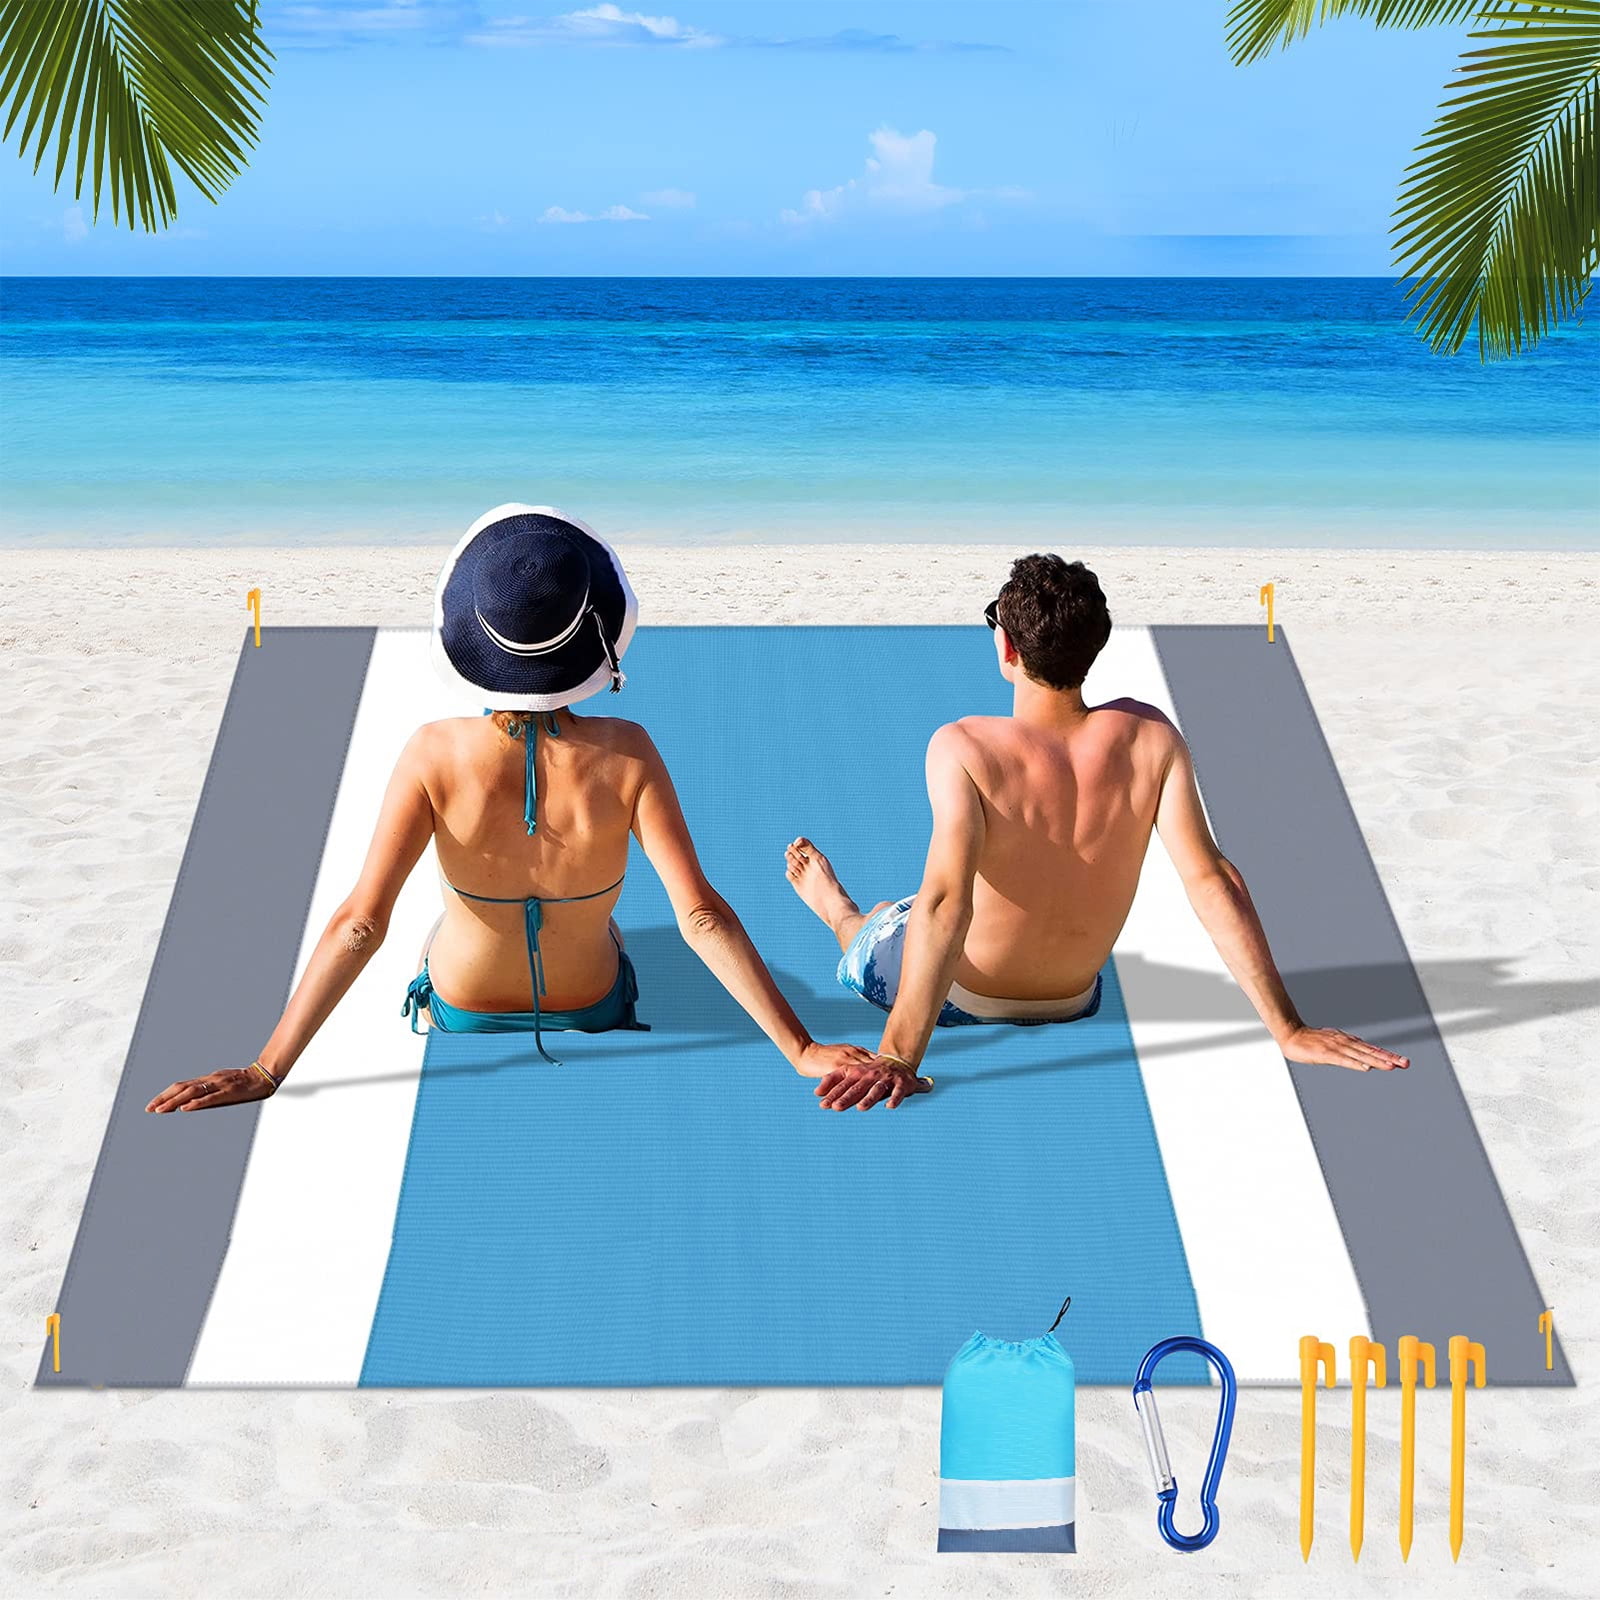 with 4 Fixing Nails-Suitable for Beach Park Travel and Camping Picnic Blanket Beach Mat Large 210 x 200cm Outdoor Waterproof and Sandproof Beach Blanket 